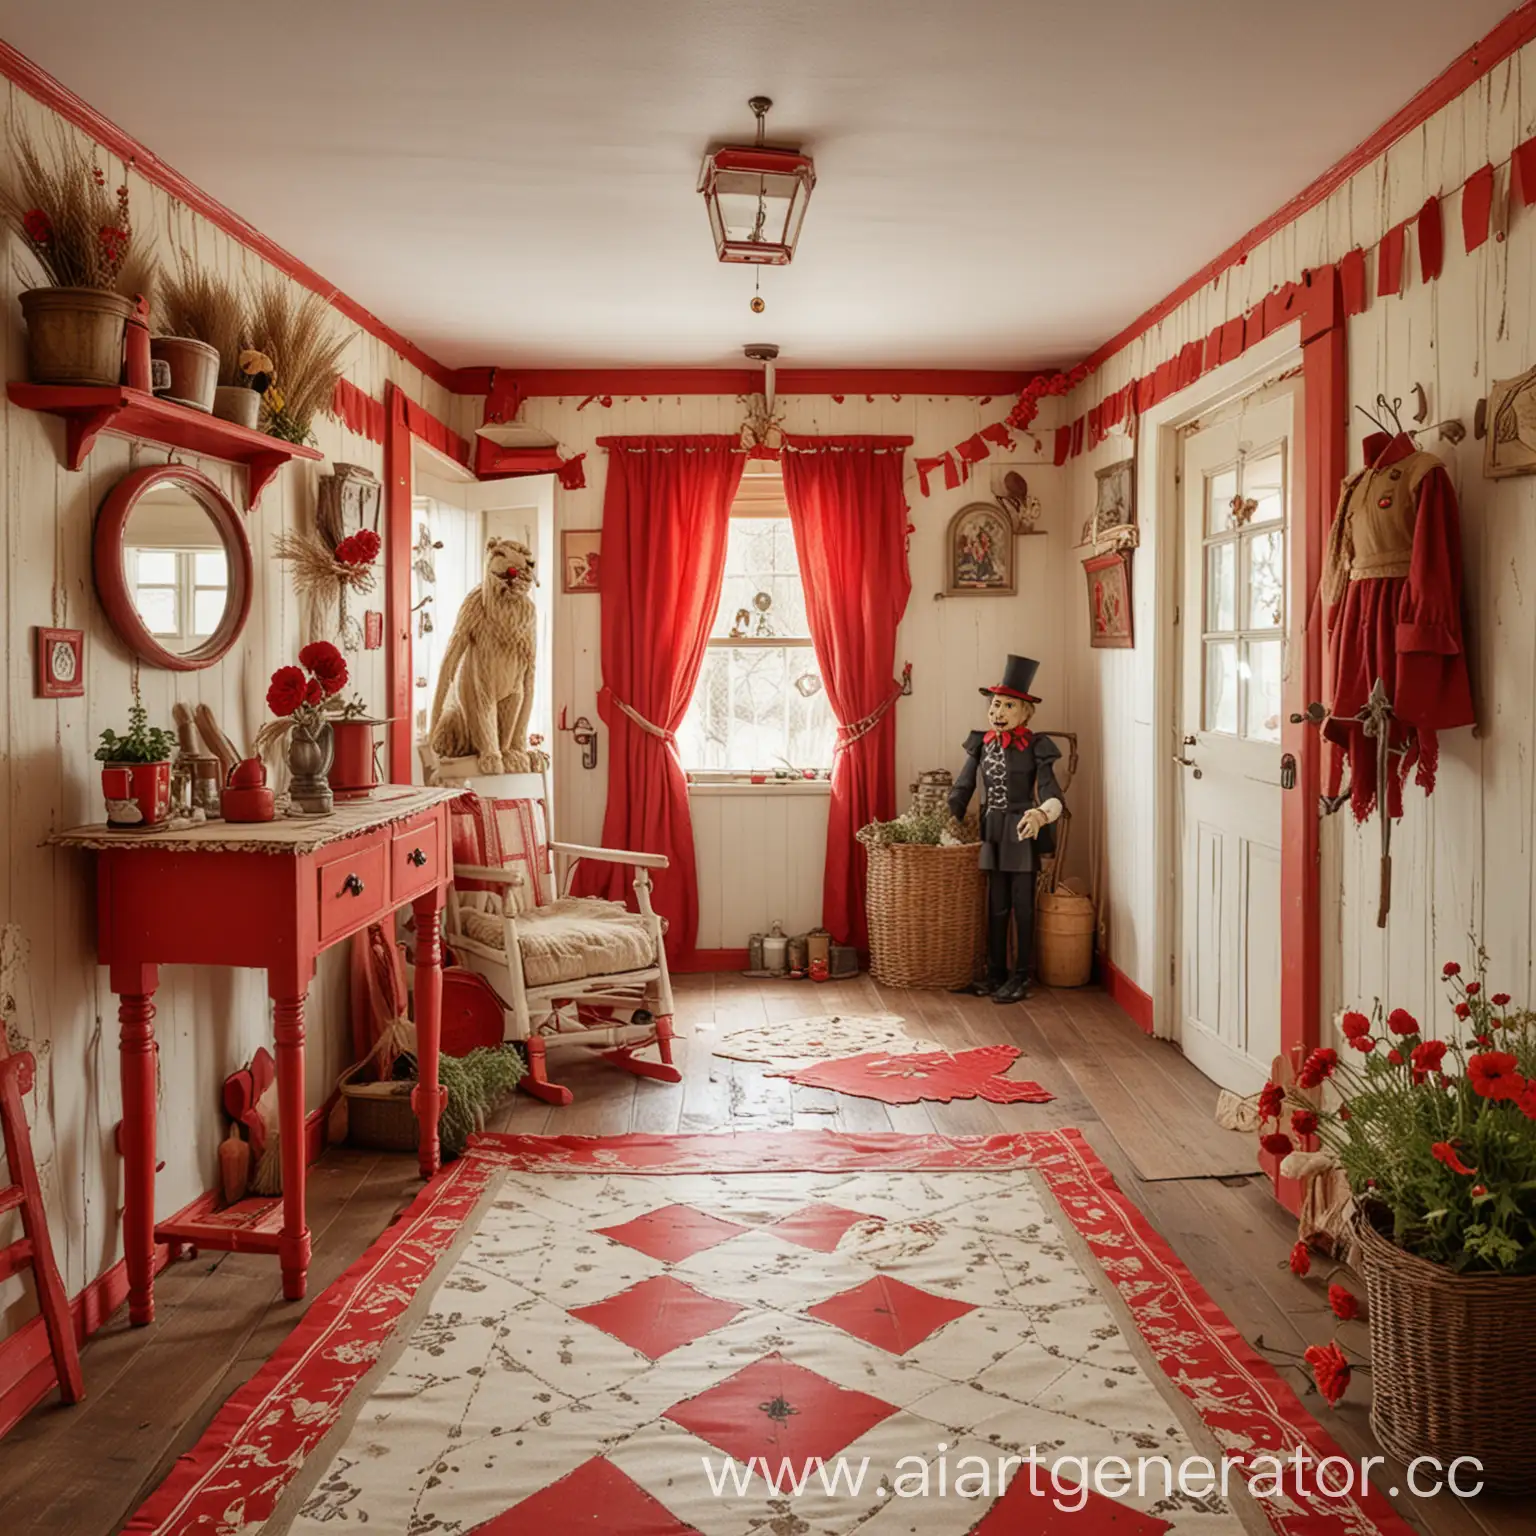 Whimsical-Wizard-of-Oz-Cottage-Interior-with-Lion-Scarecrow-and-Tin-Woodsman